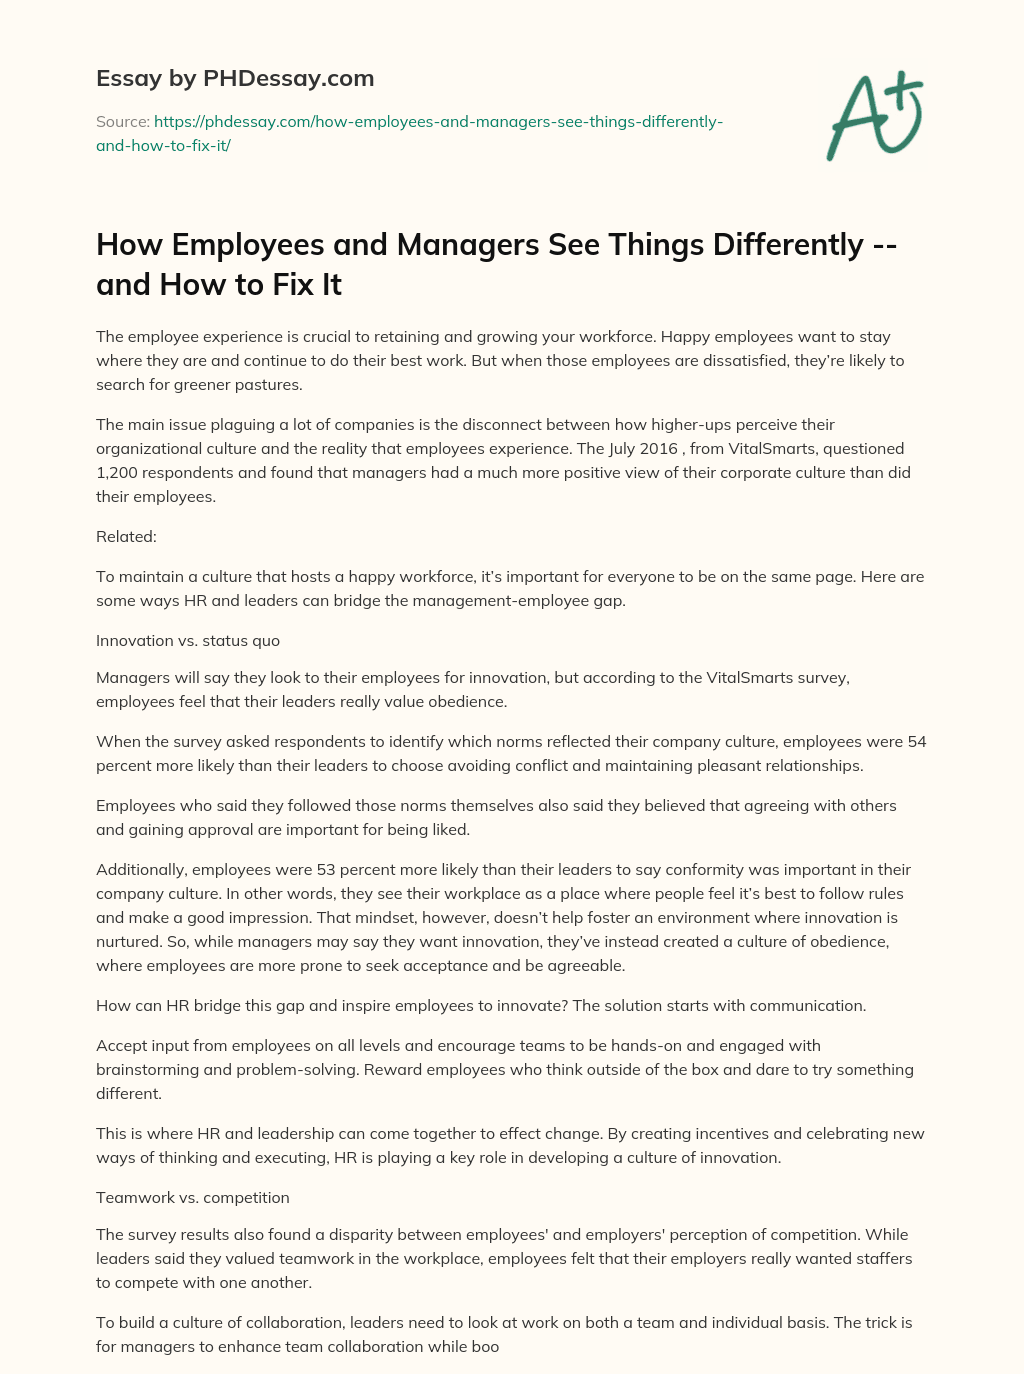 How Employees and Managers See Things Differently — and How to Fix It essay